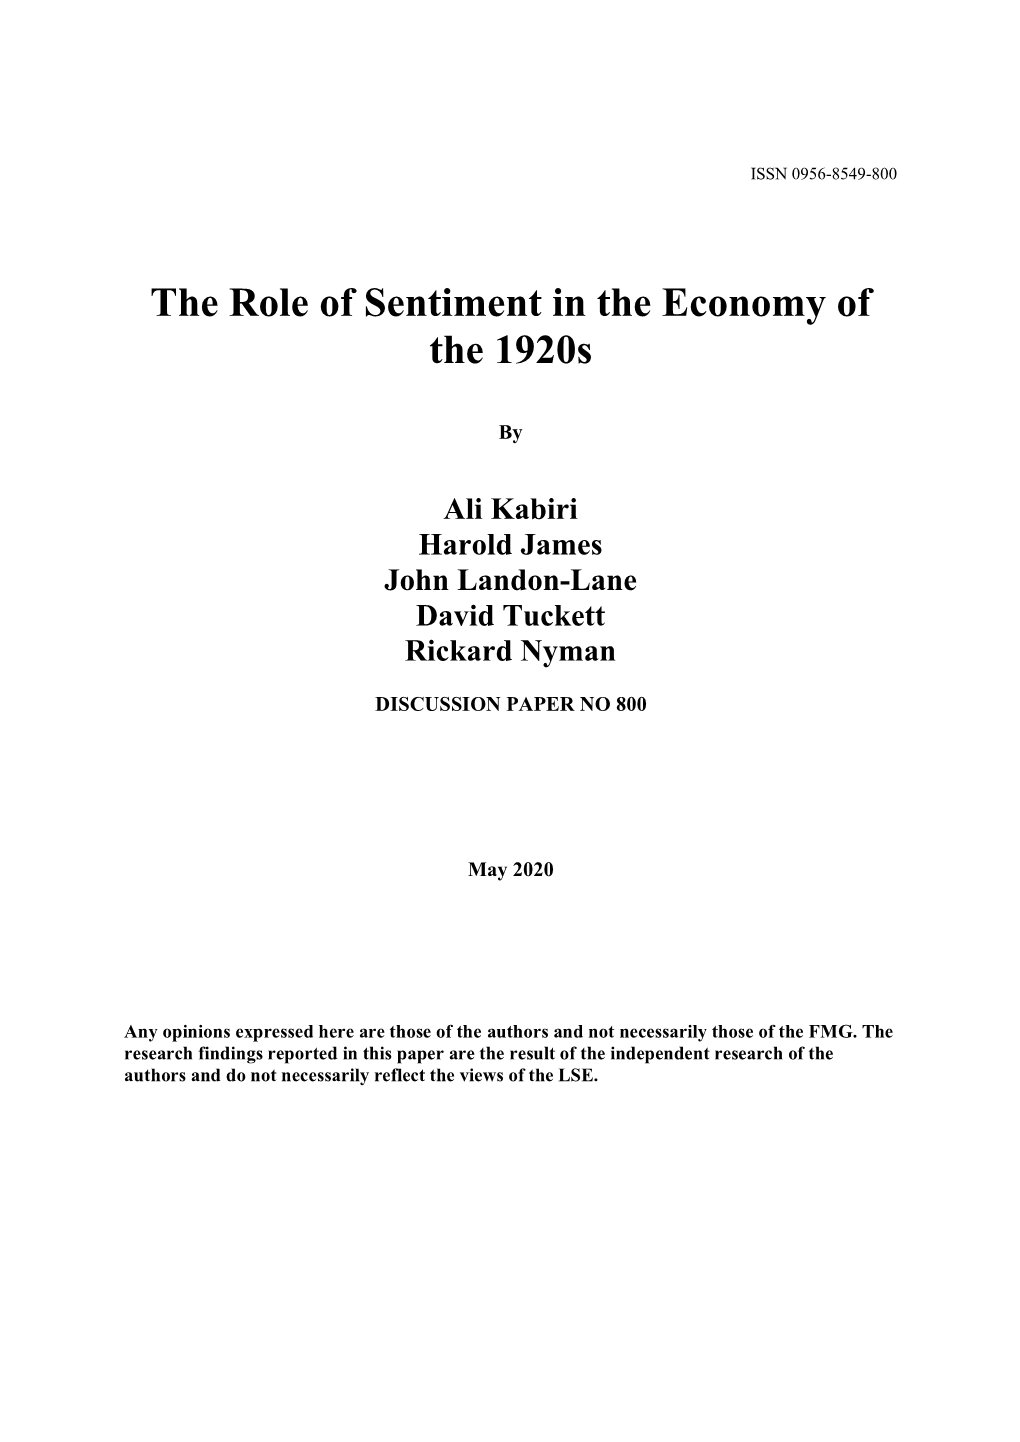 The Role of Sentiment in the Economy of the 1920S